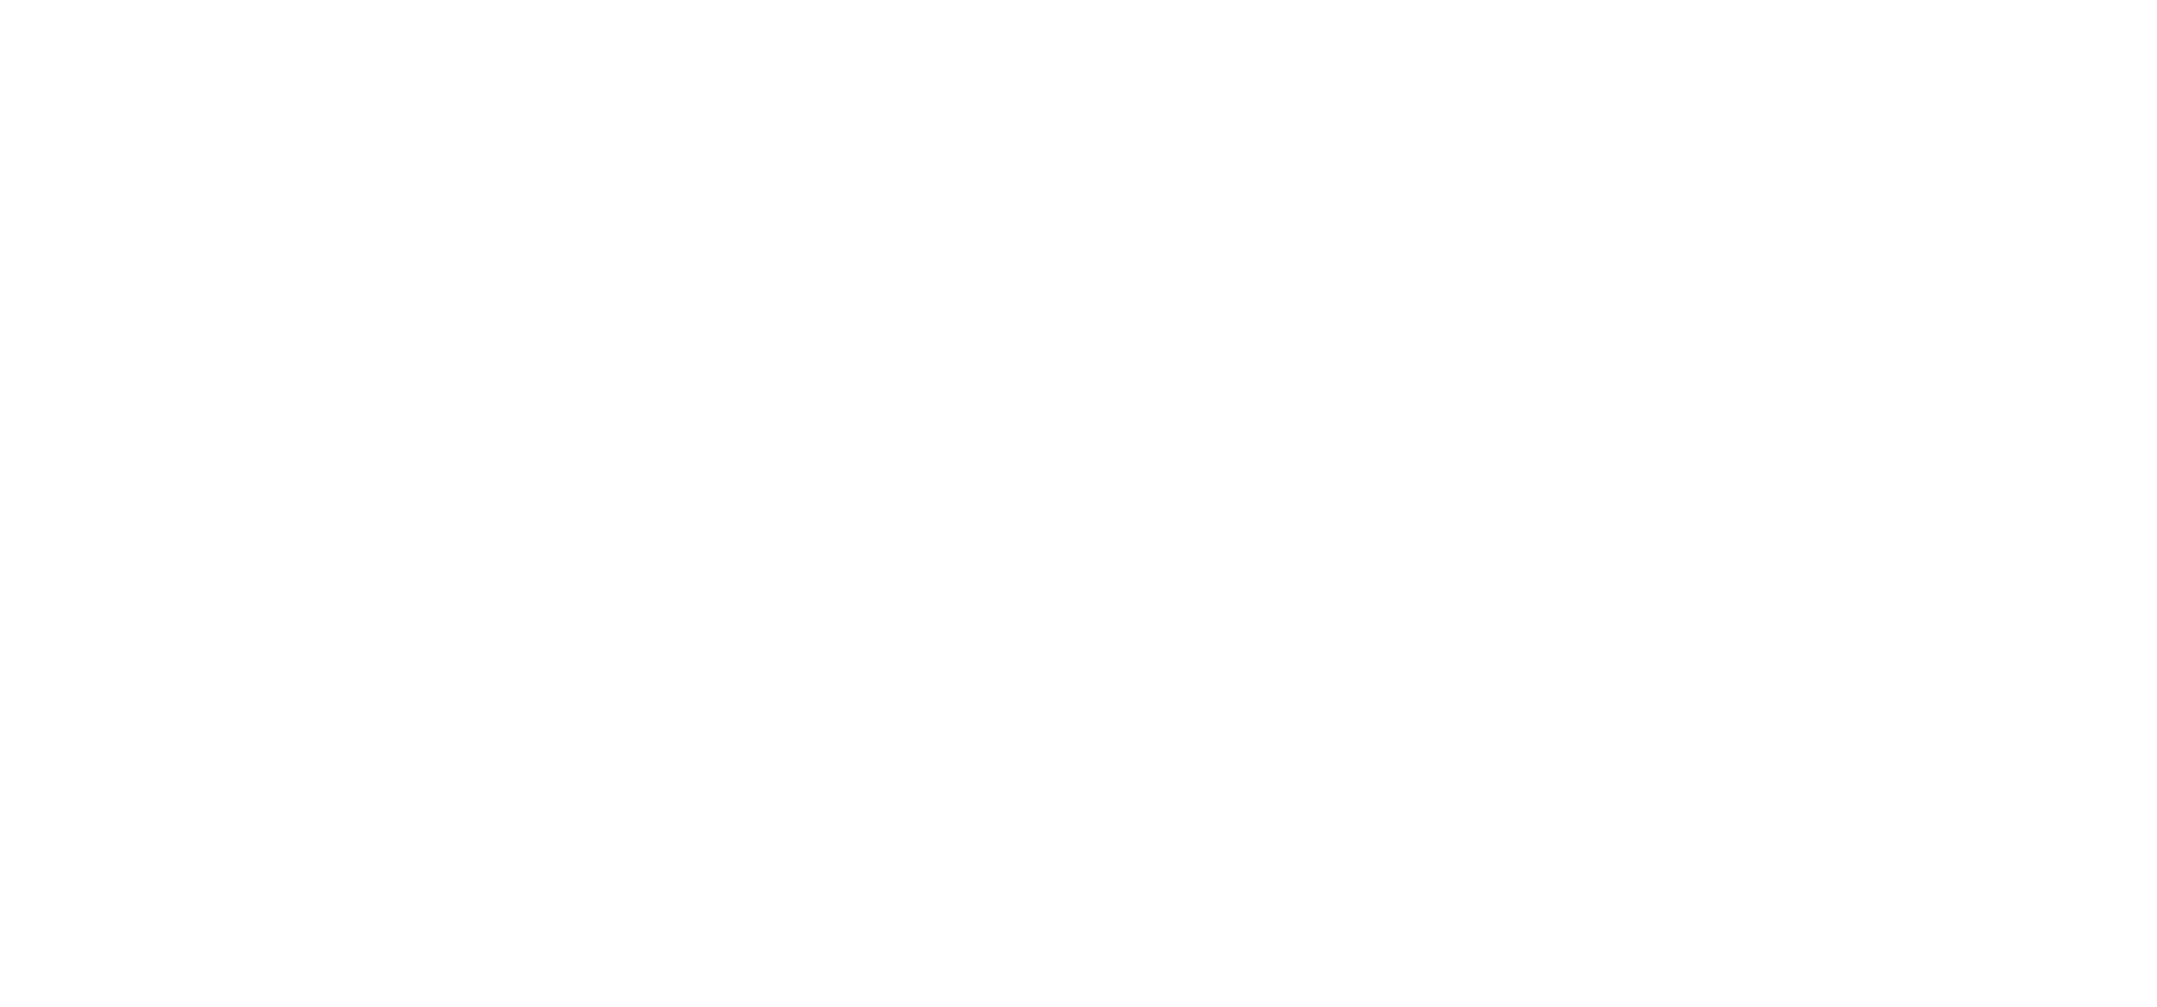 NATUR-PACK, a.s.